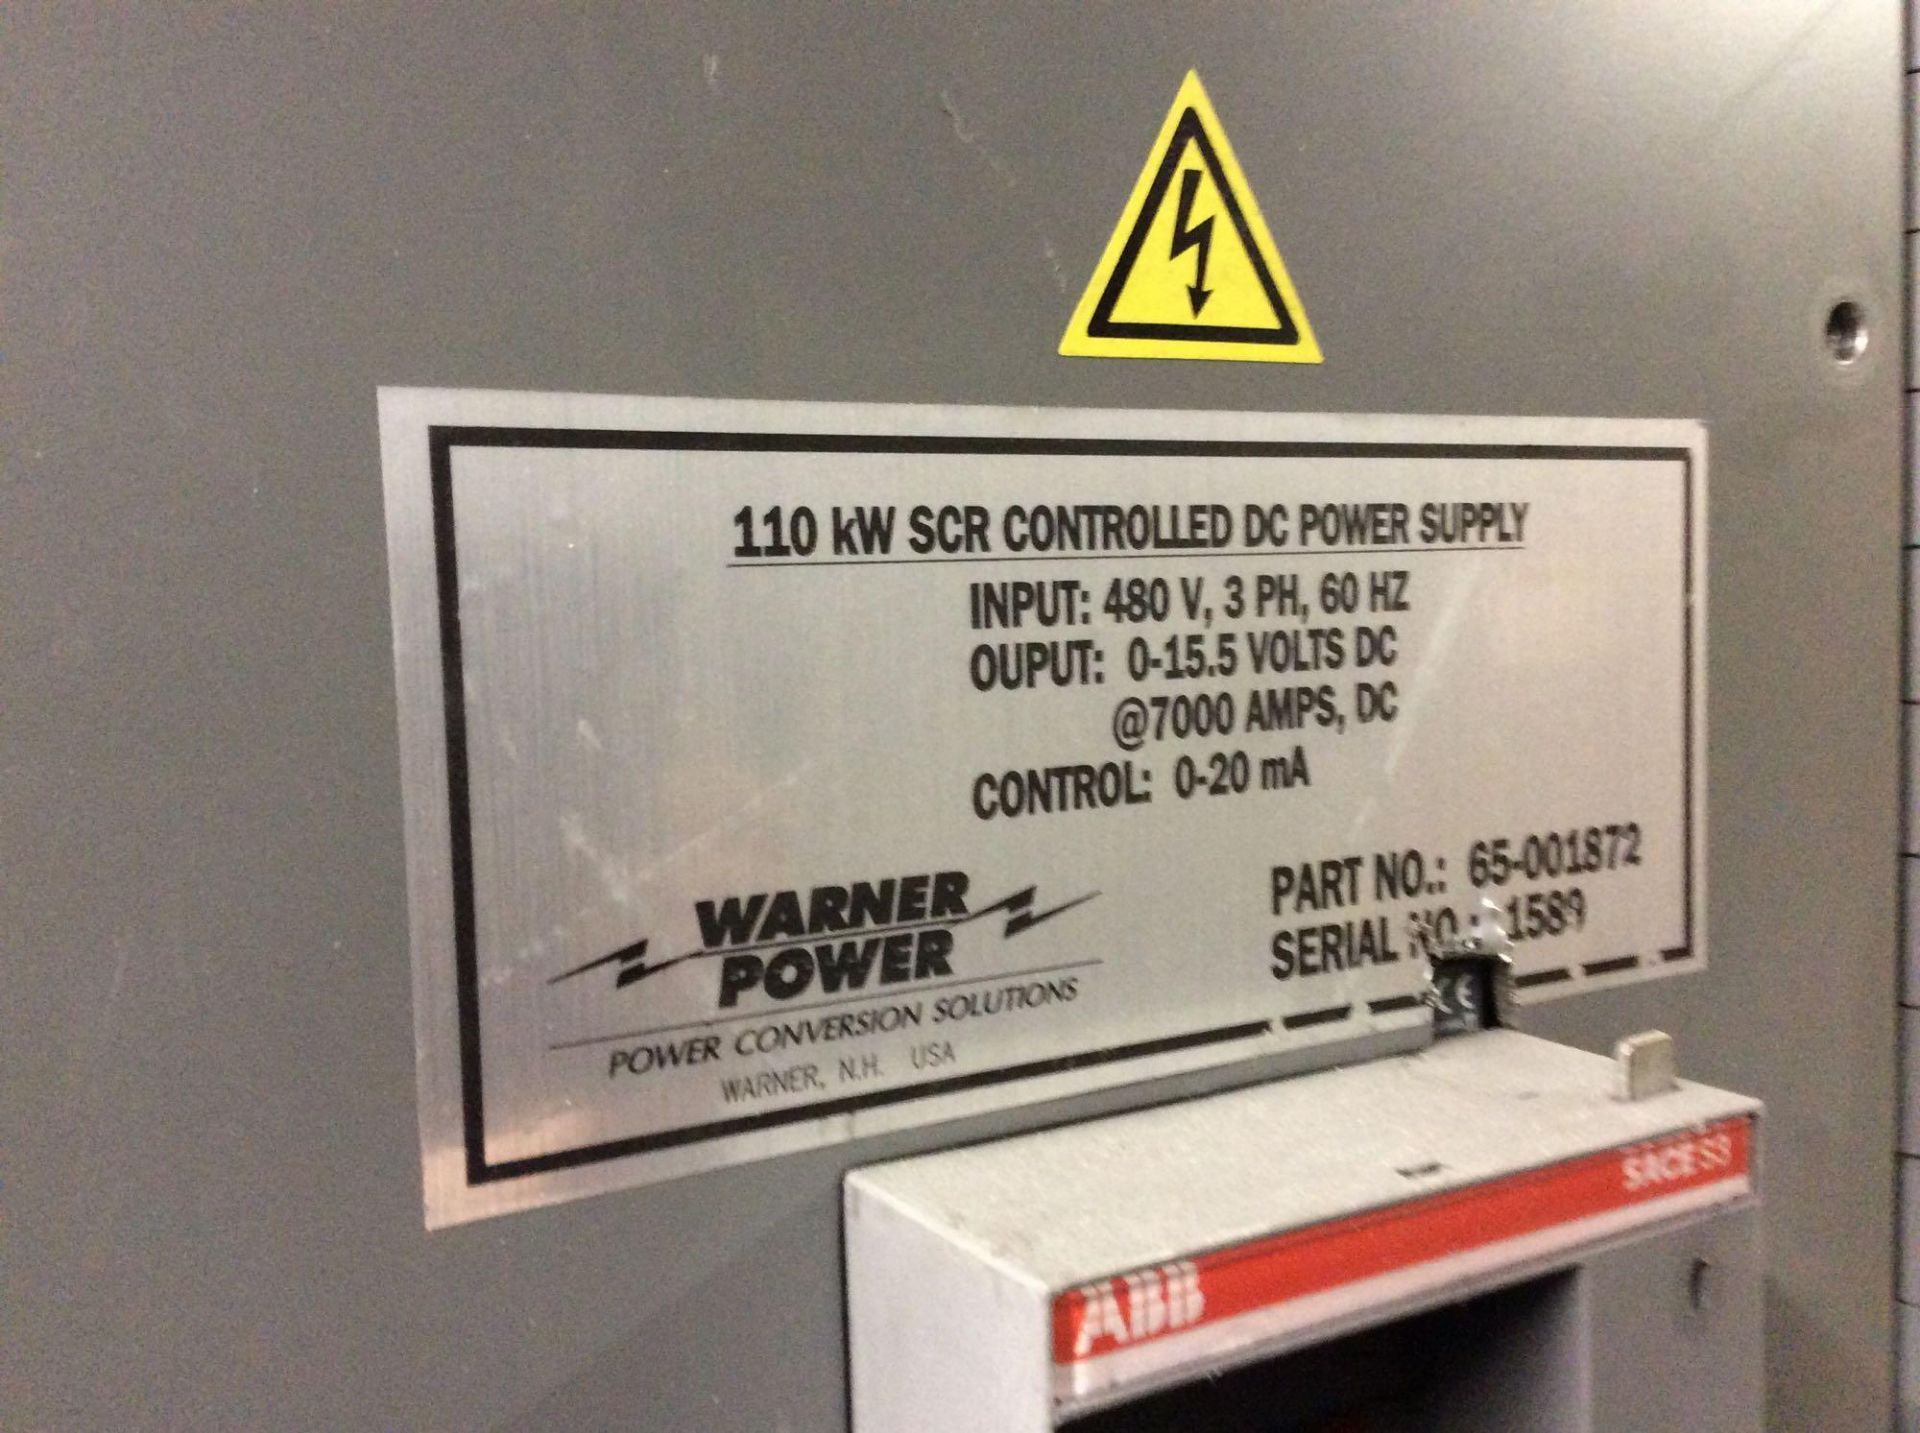 Warner Power 110 kw total SCR controlled DC power supply 480 volt input, 7000 A output - Image 2 of 2